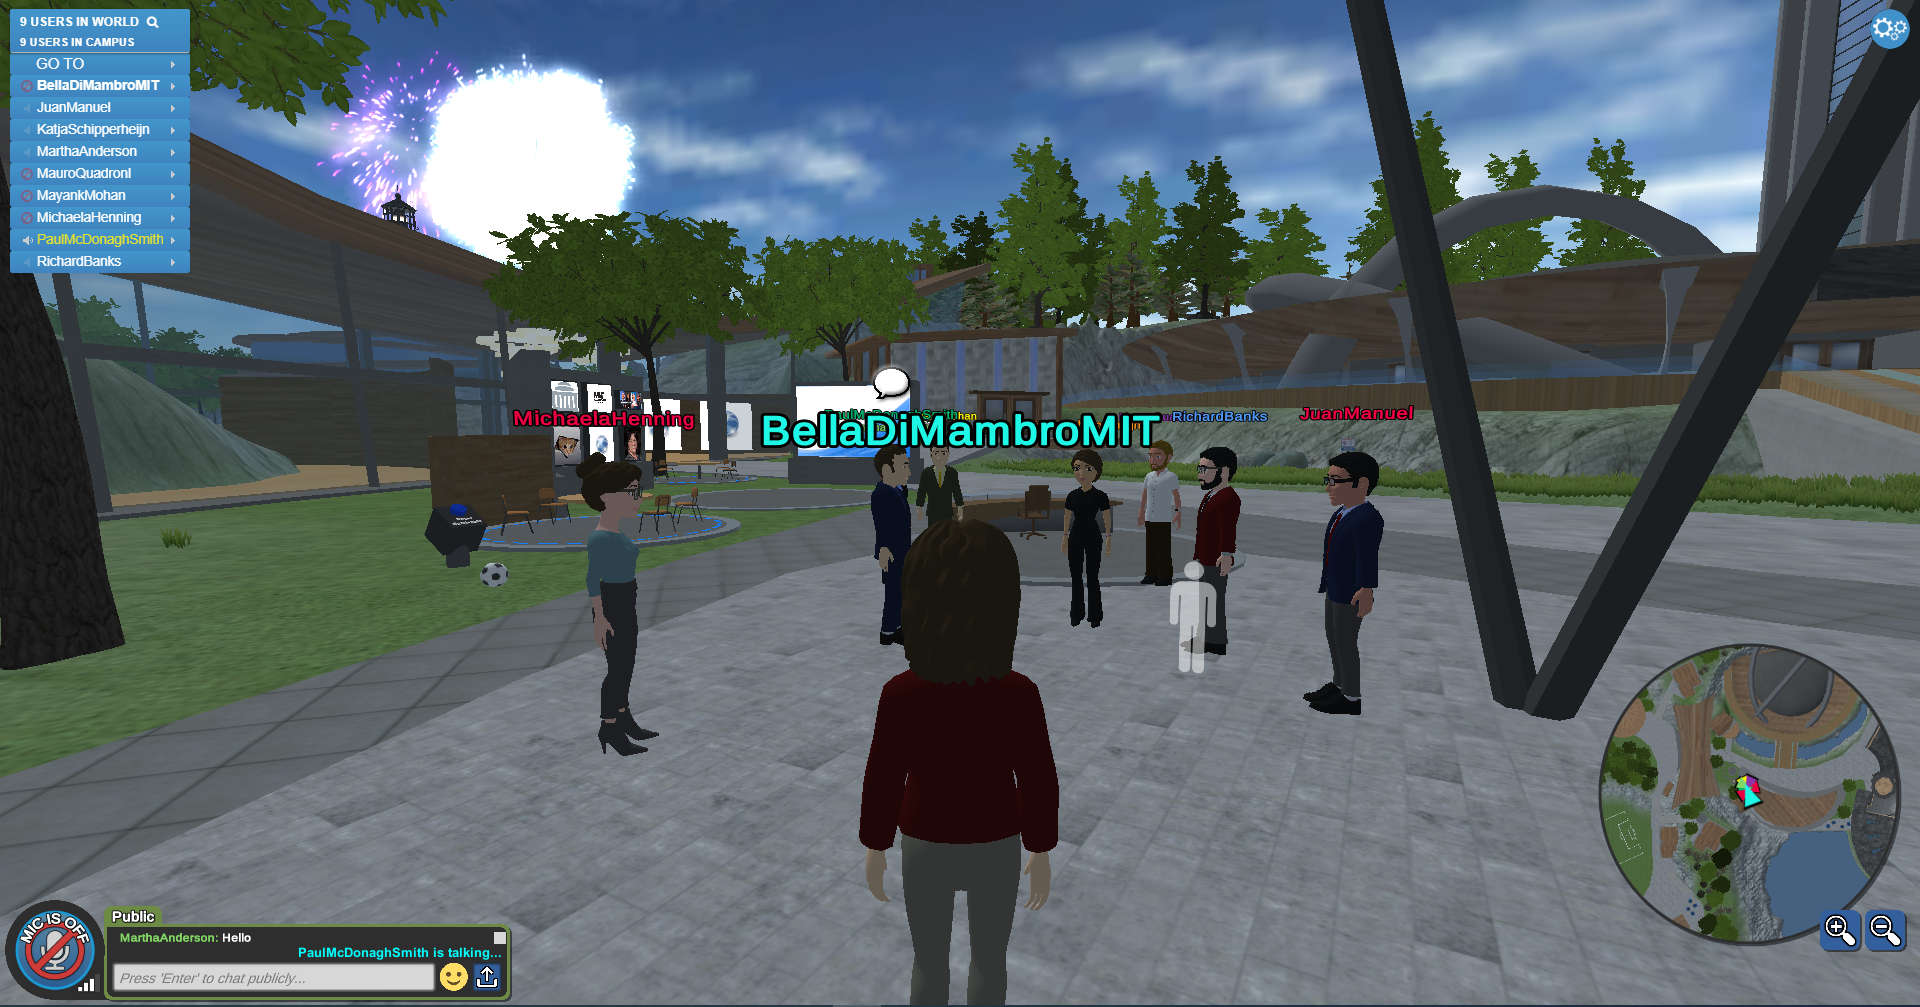 Student within MIT Sloan’s 4D virtual center interacting with other students in a virtual simulation of campus.